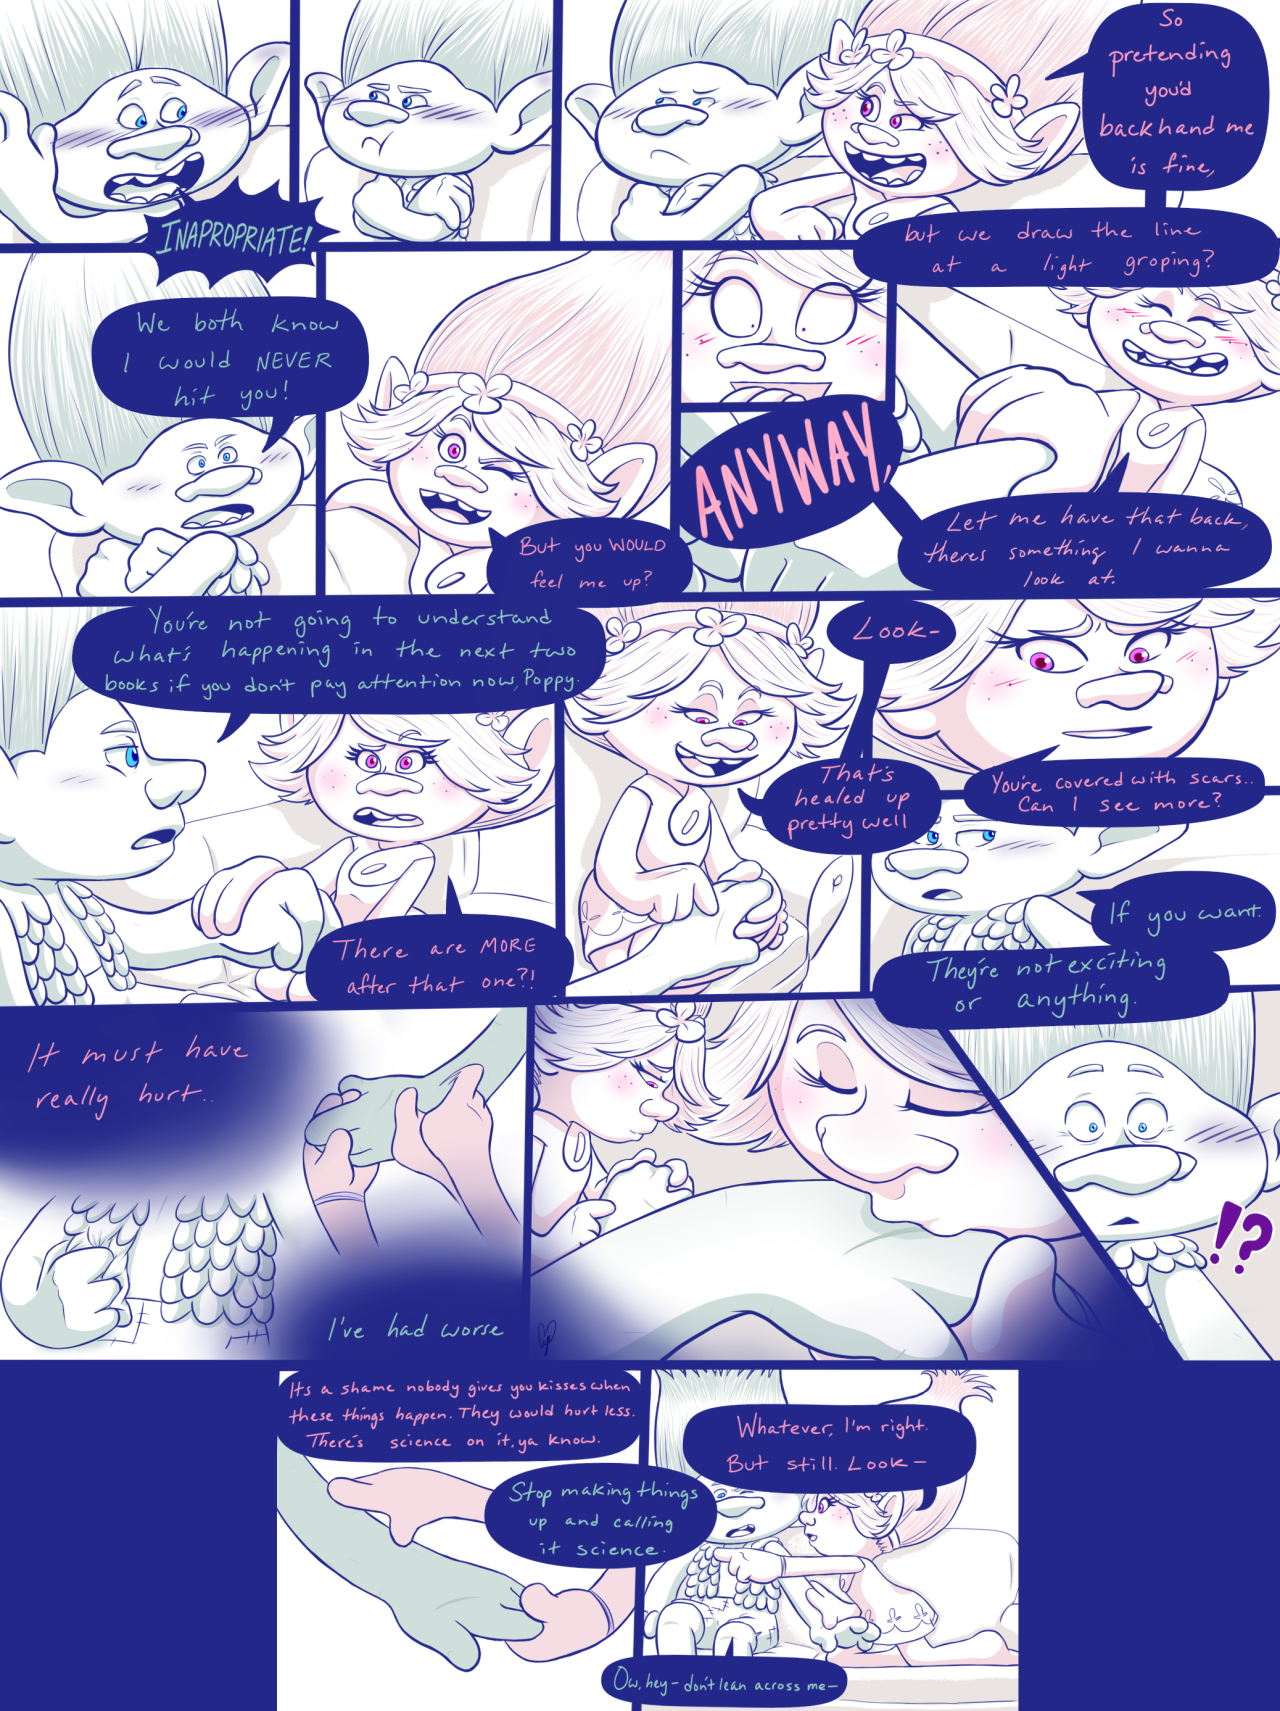 Page 5 :’)
I may have to post the saucy pages somewhere else lol